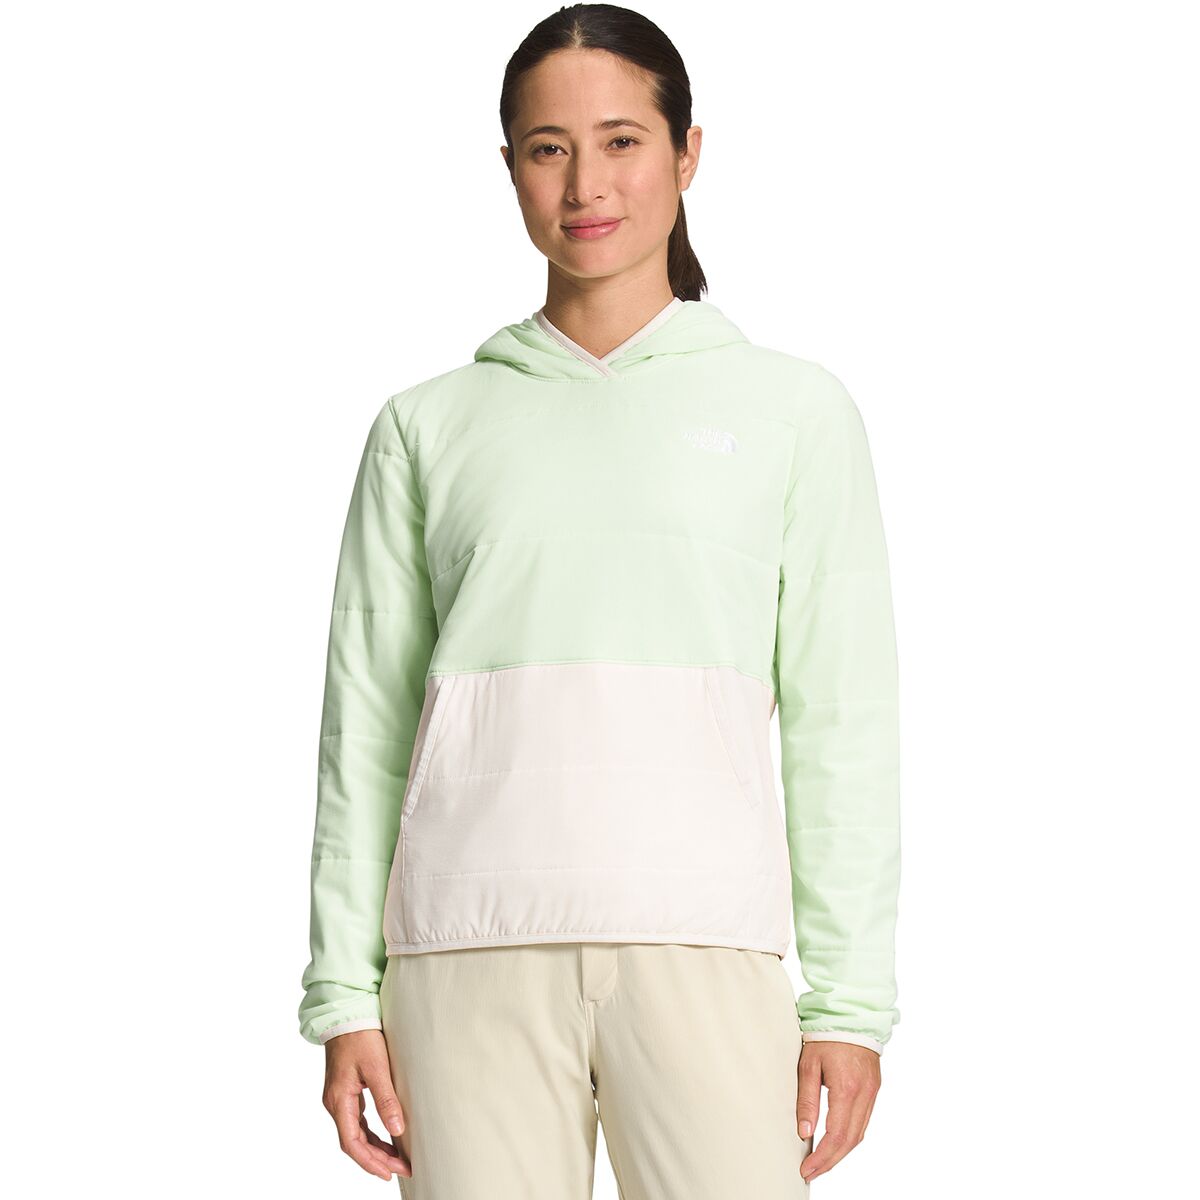 The North Face Mountain Sweatshirt Pullover - Women's